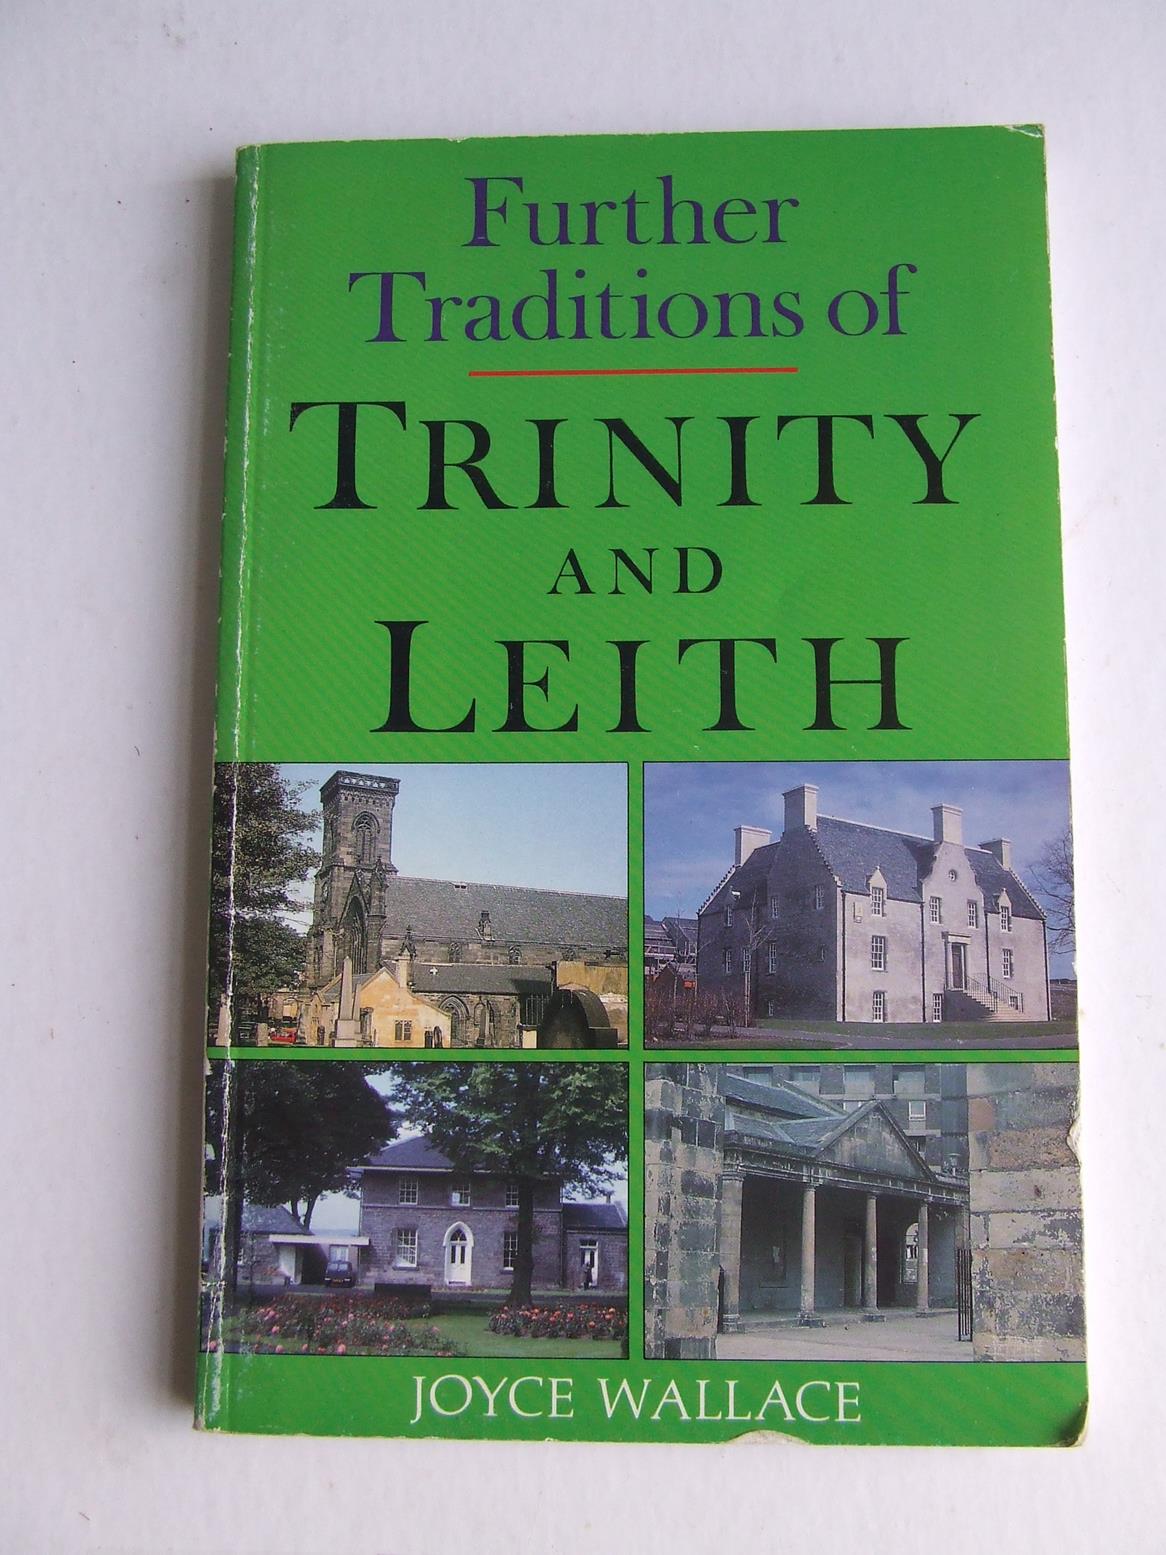 Further Traditions of Trinity and Leith